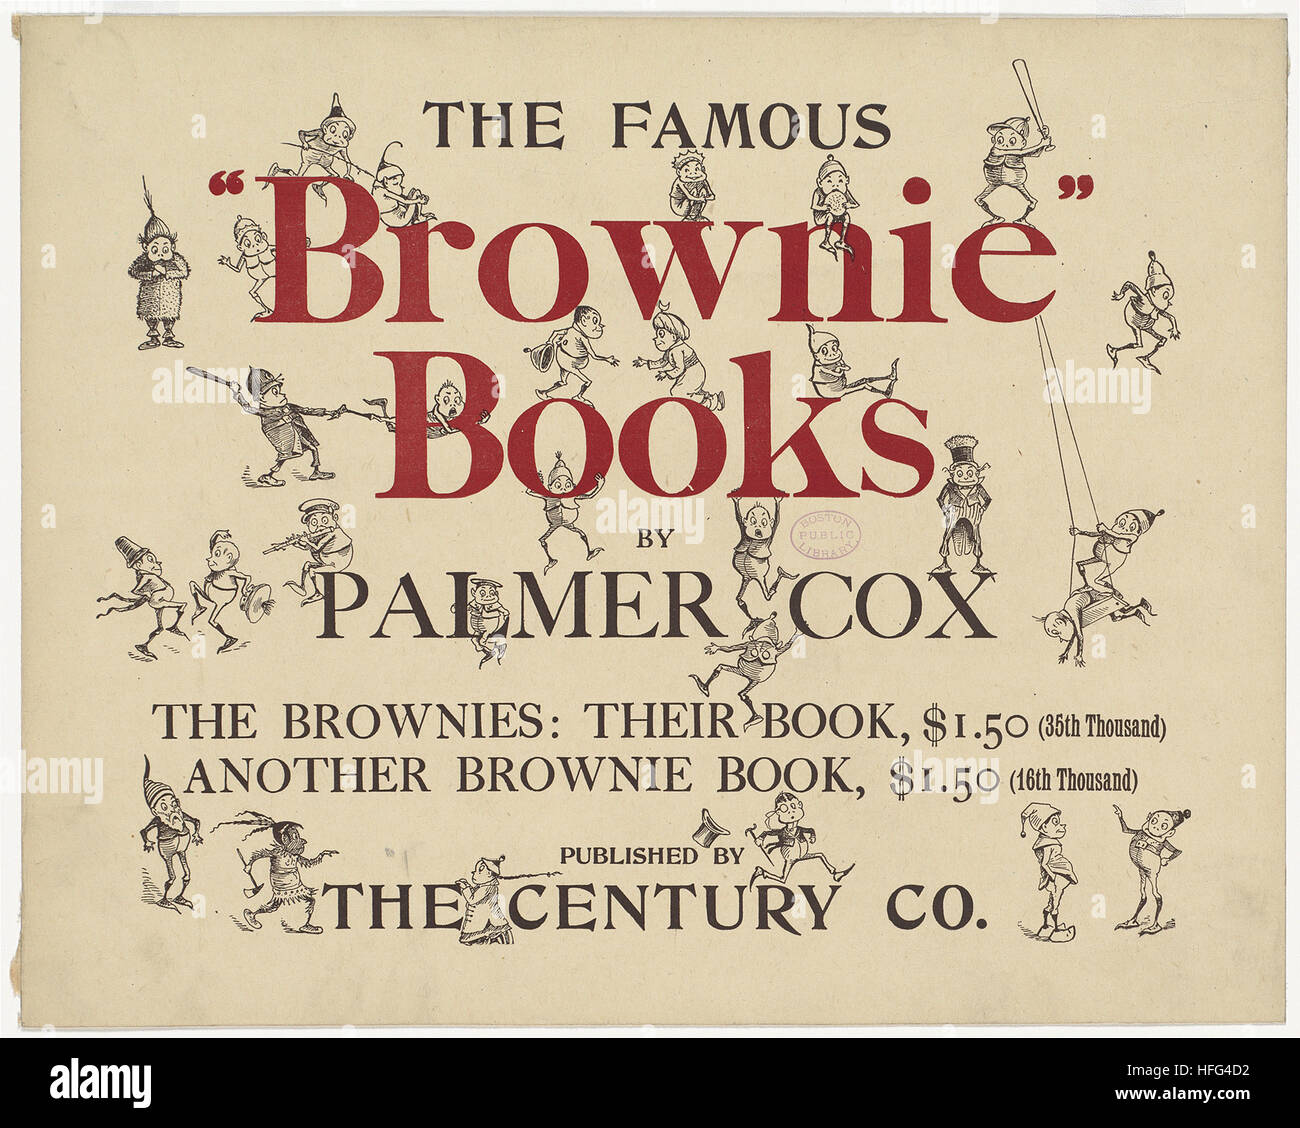 The famous brownie books by Palmer Cox Stock Photo